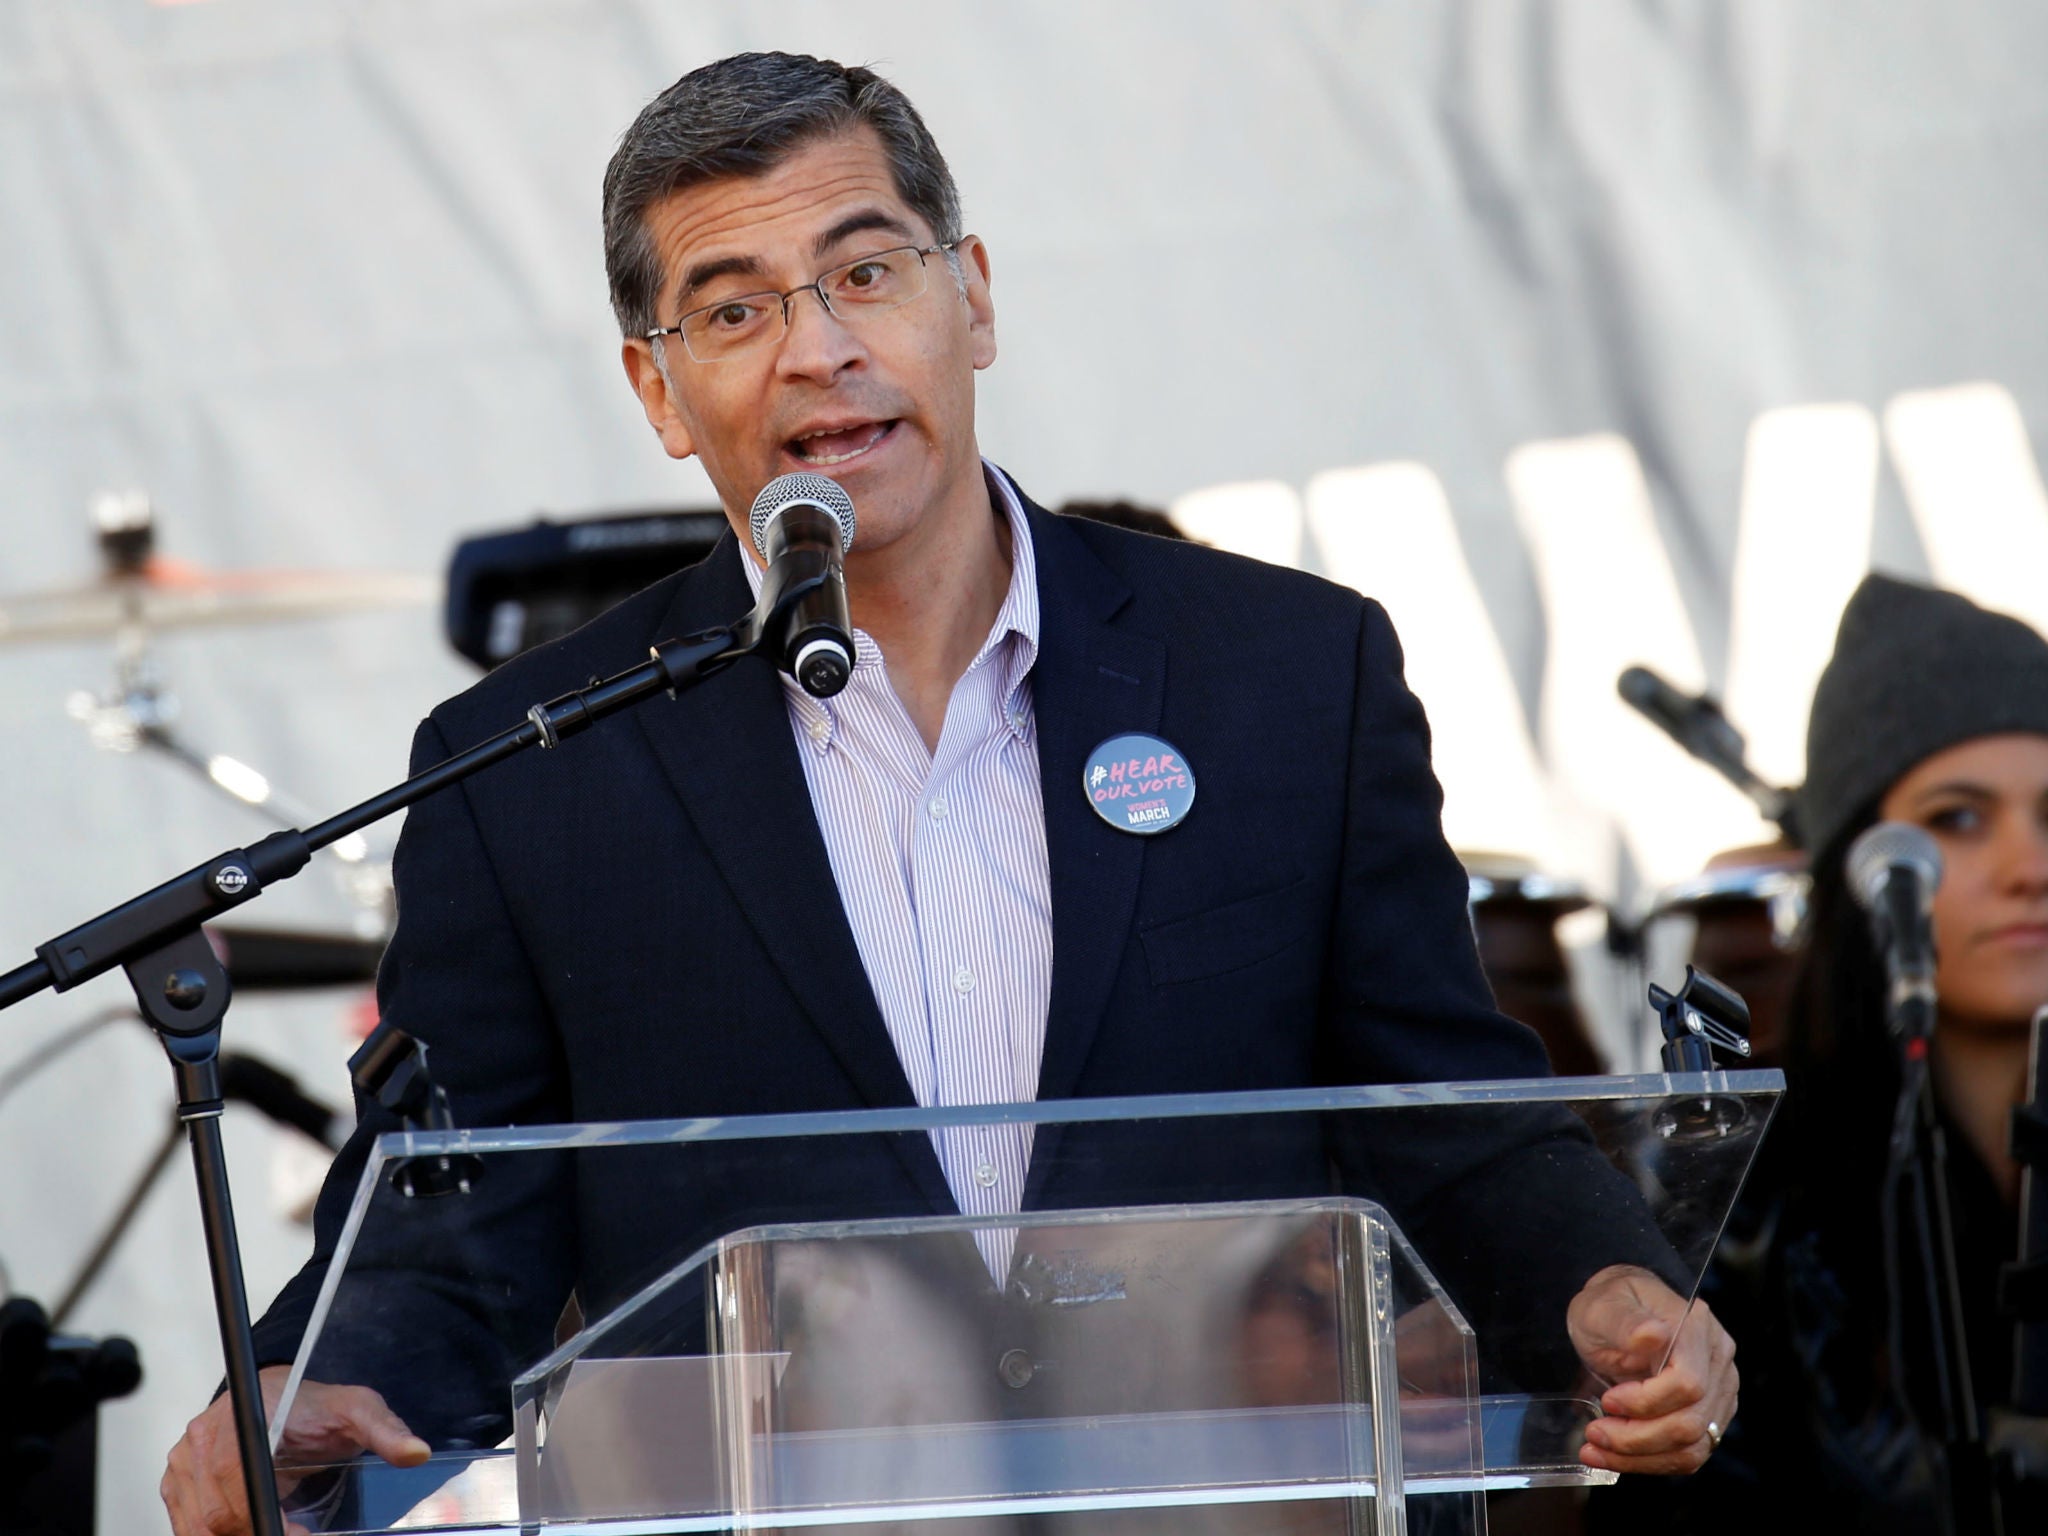 California Attorney General Xavier Becerra continued to build his record of suing the Trump administration